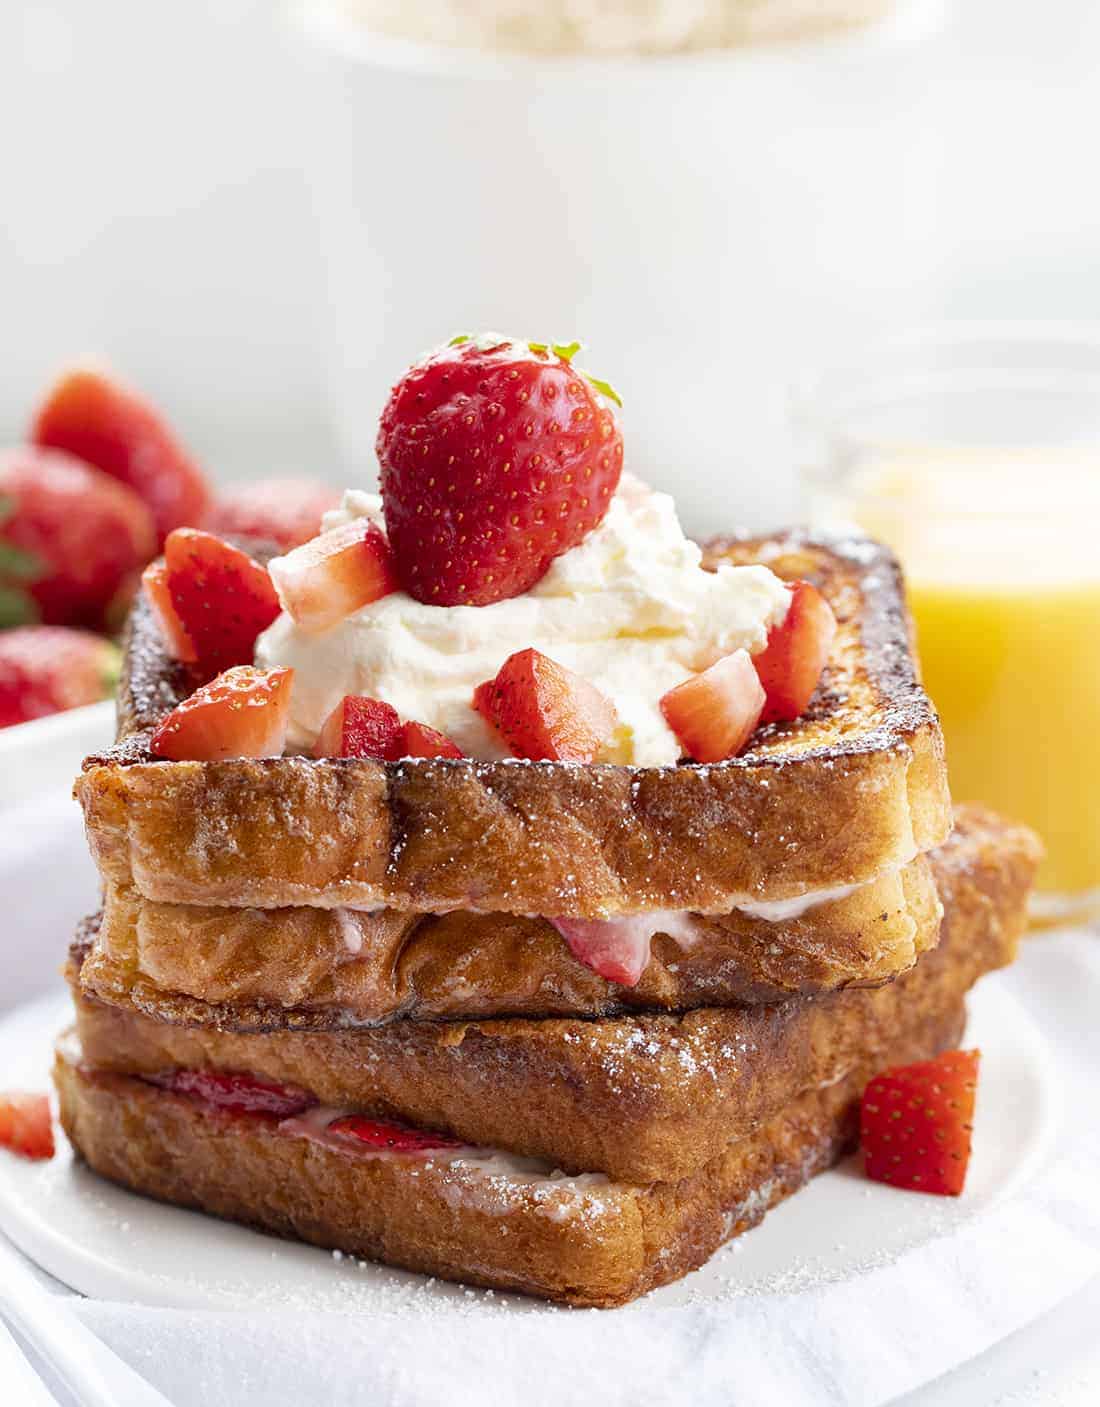 Strawberry Stuffed French Toast on a Plate